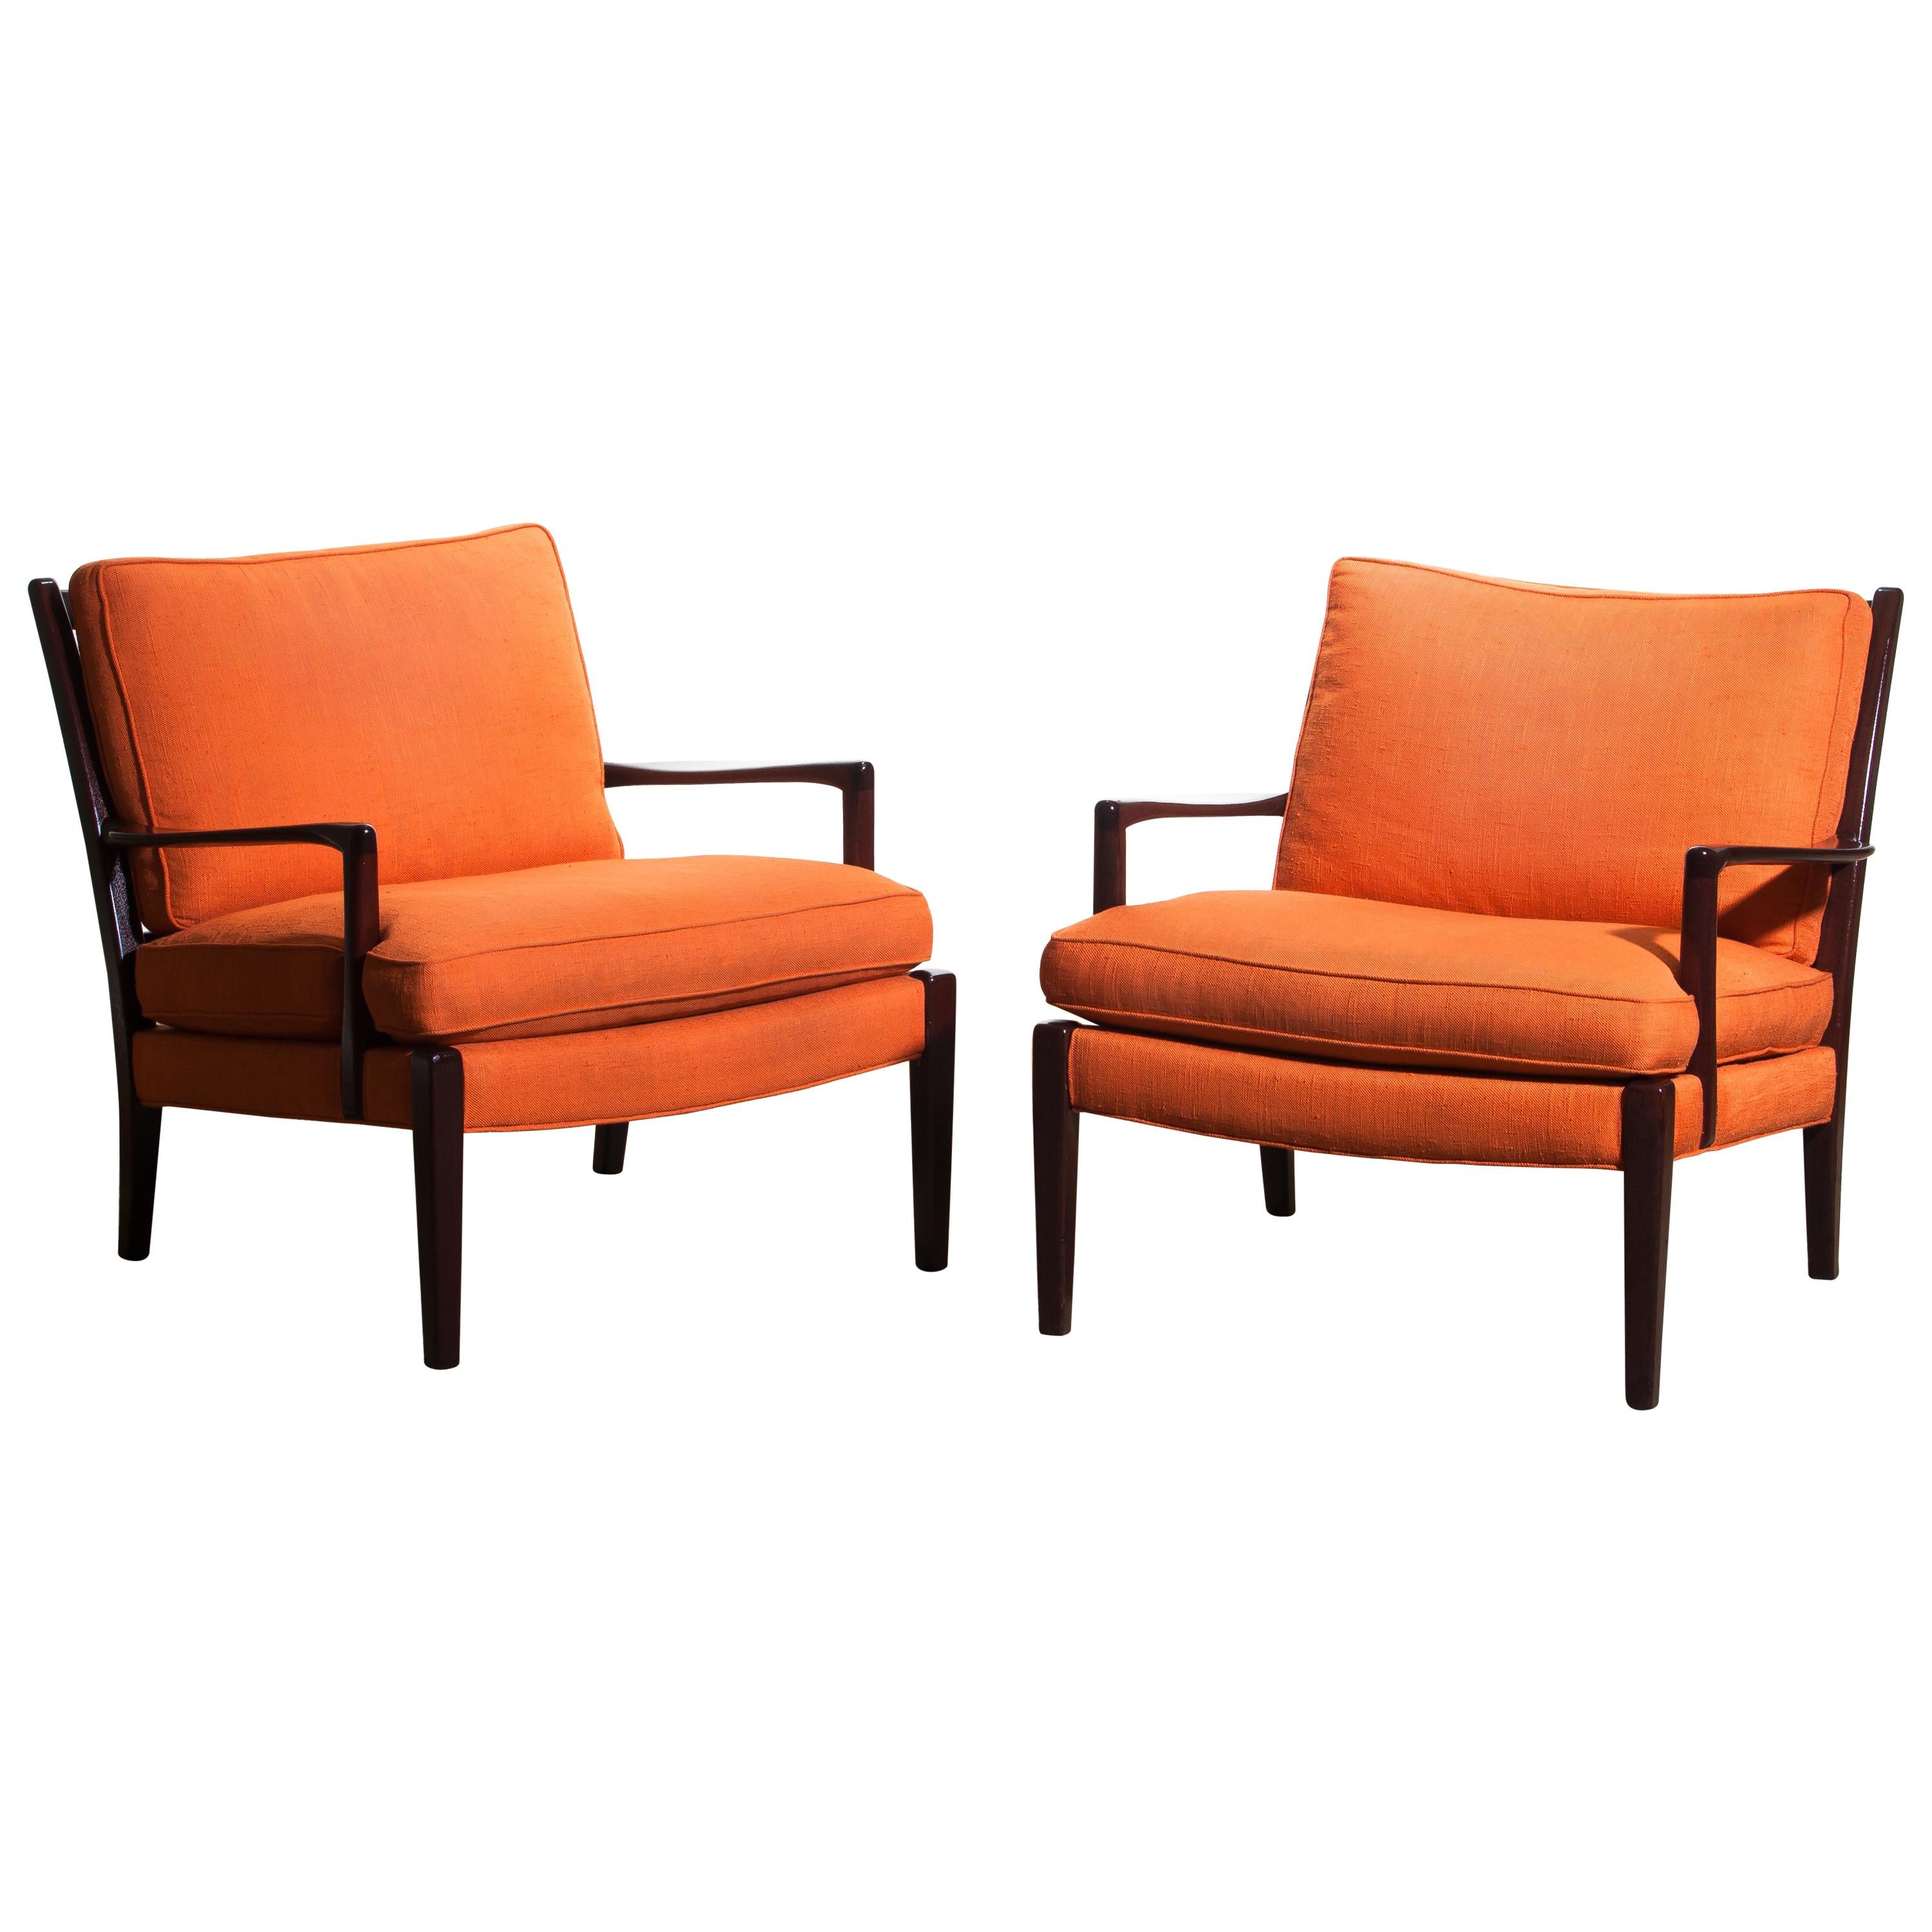 1960s, Pair Of Orange Linen Easy or Lounge Chairs "Löven" by Arne Morell, Sweden